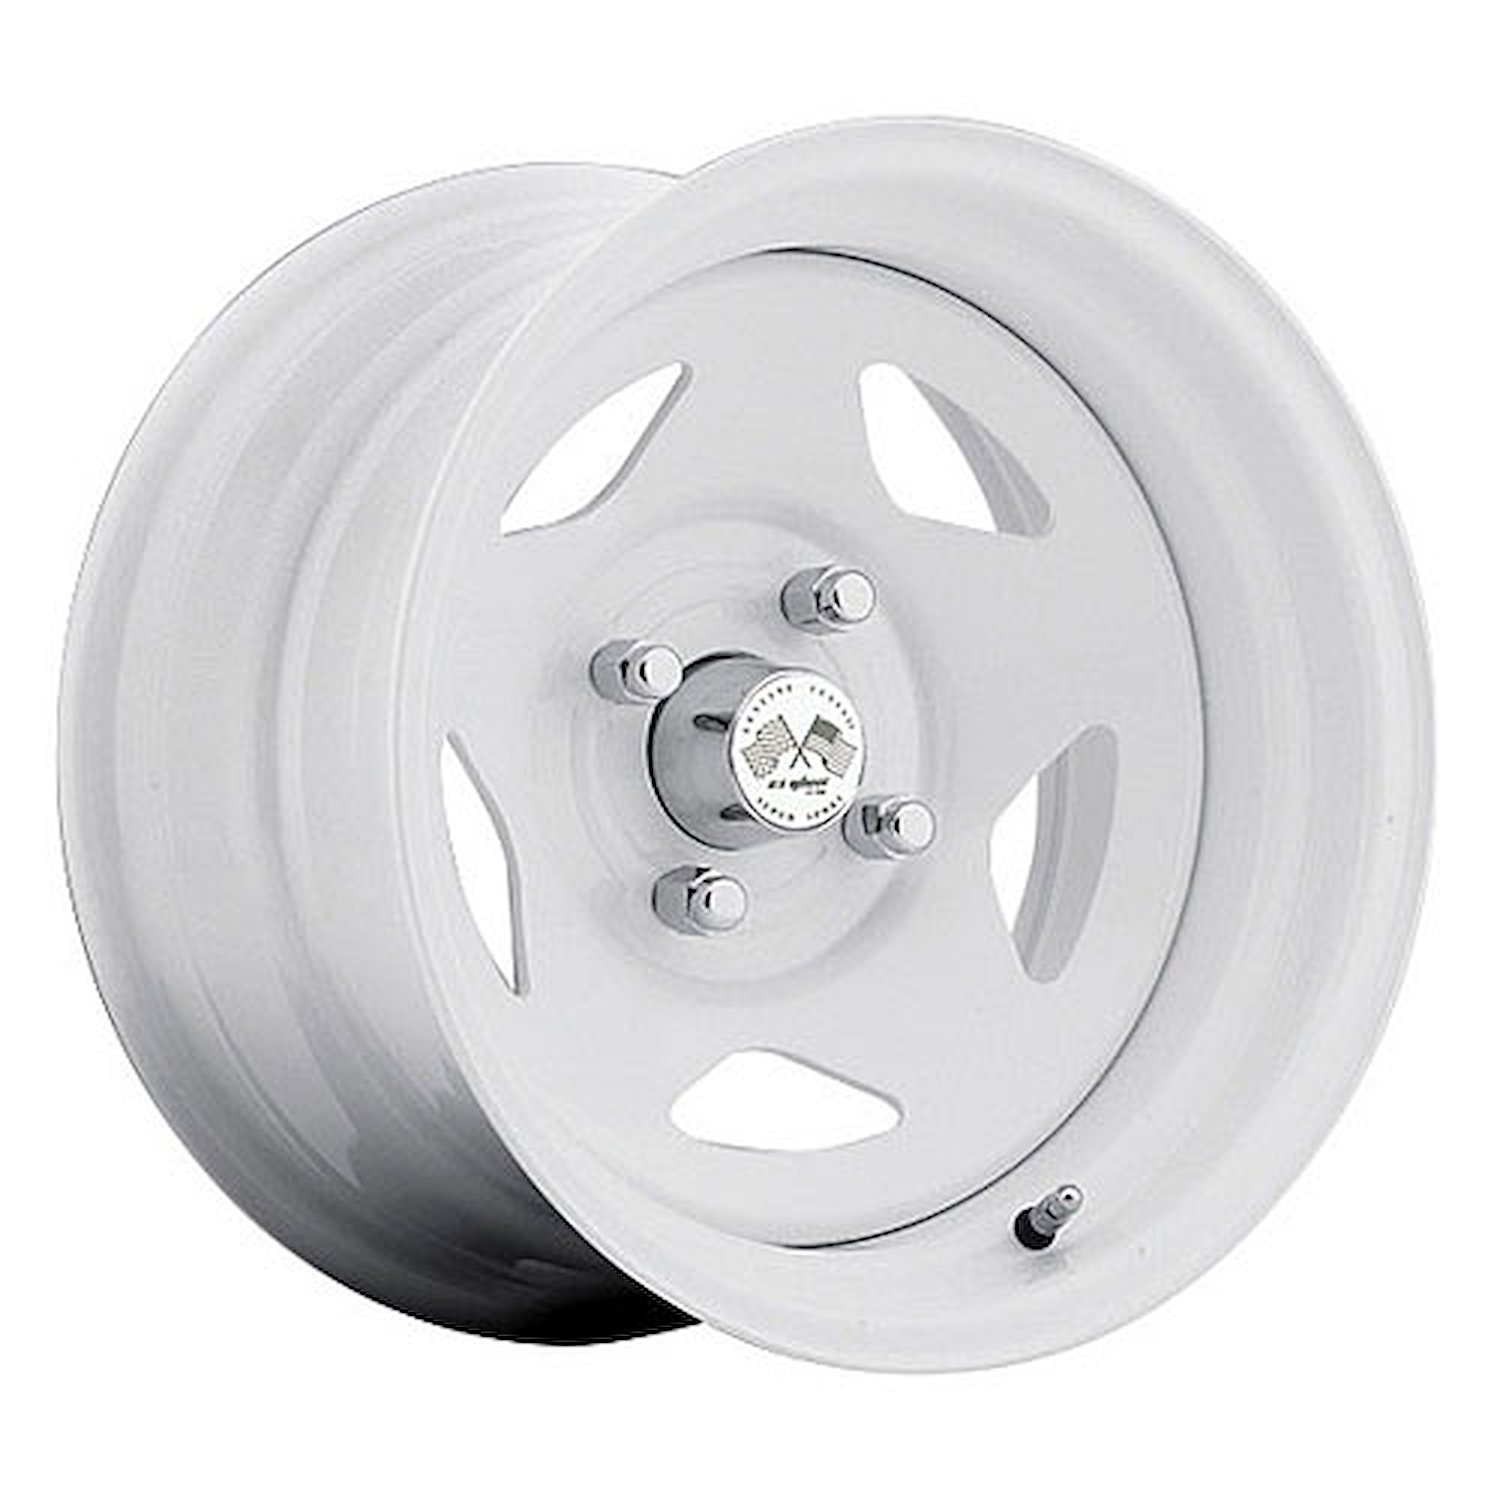 PAINTED STAR FWD DRIFTER WHITE 15 x 8 4 x 45 Bolt Circle 45 Back Spacing 0 offset 266 Center Bore 1400 lbs Load Rating